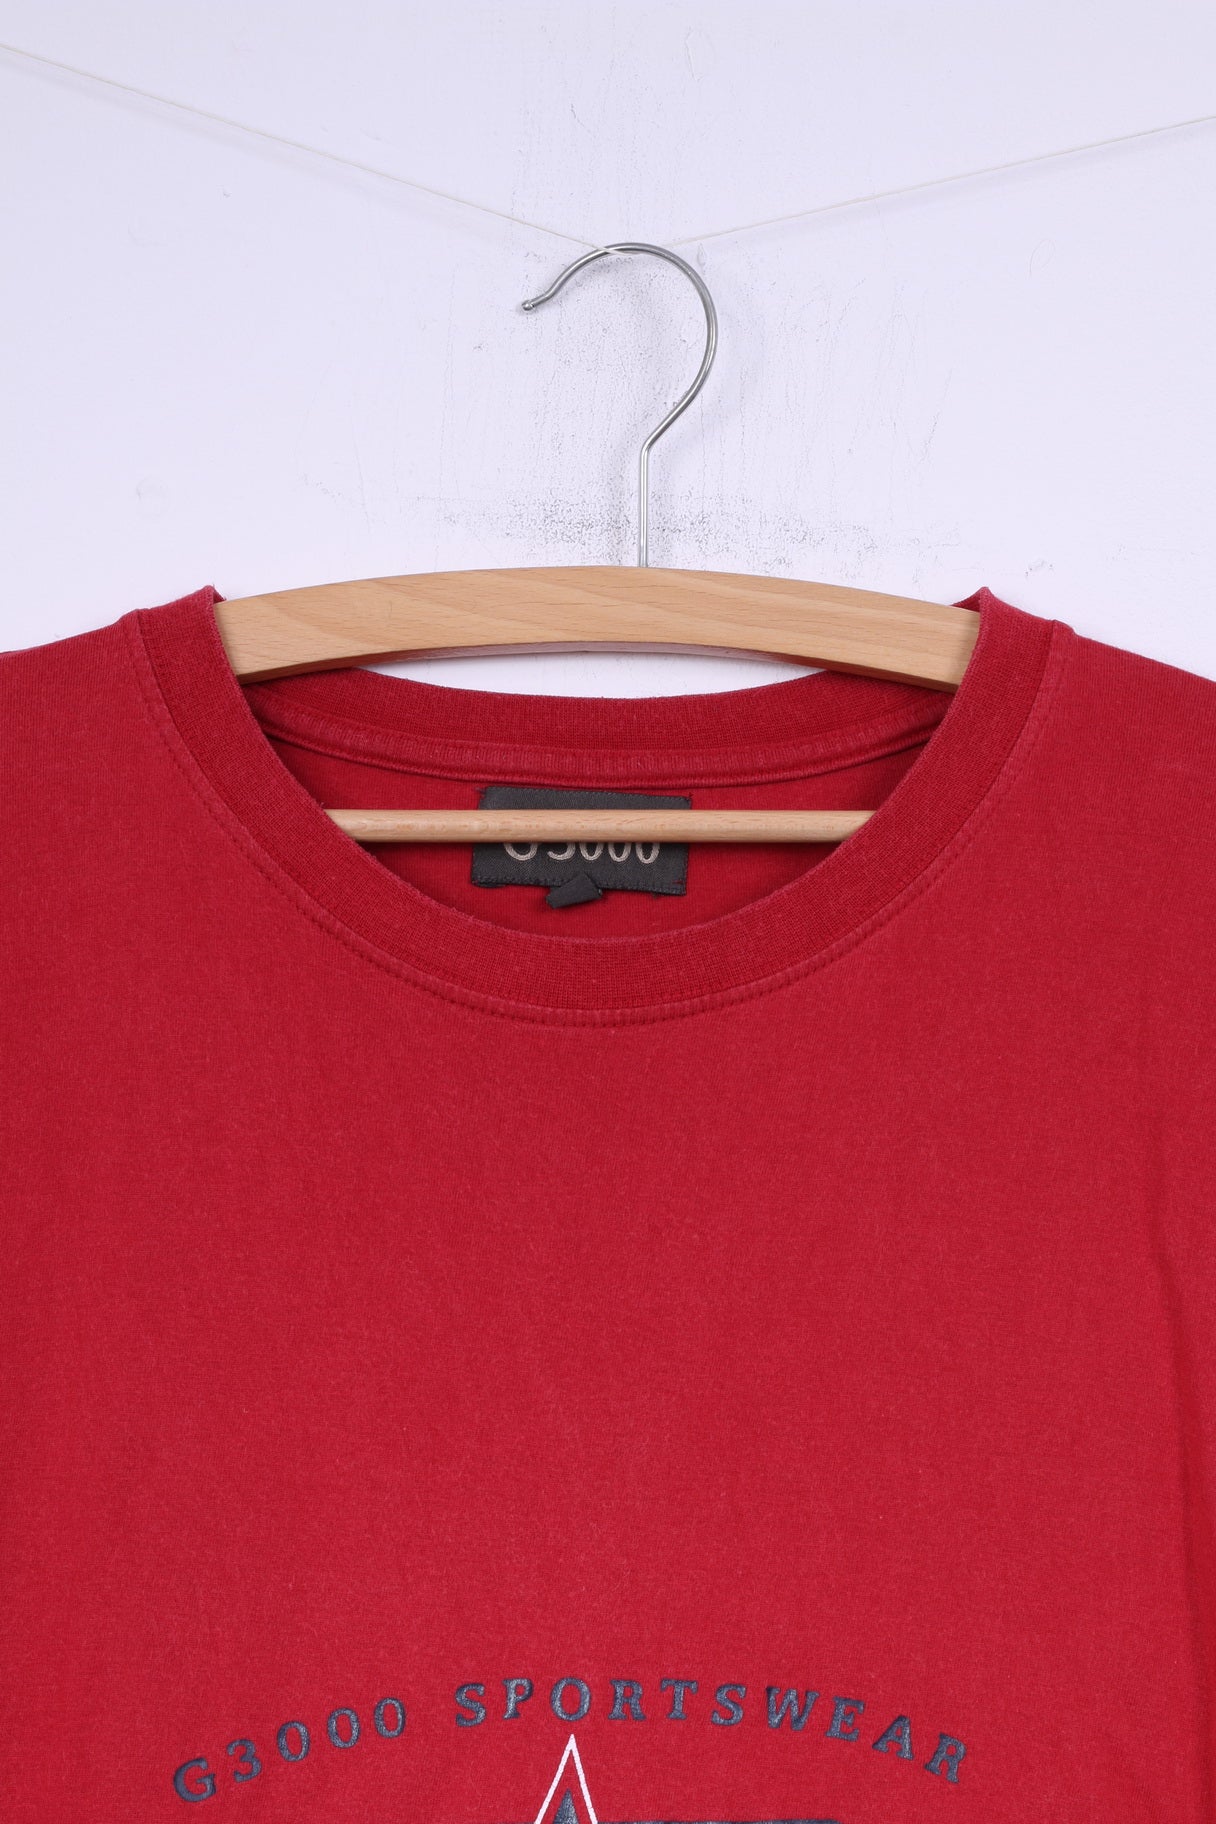 G3000 Collection Mens XL T-Shirt Red Crew Neck Cotton Top Sportswear